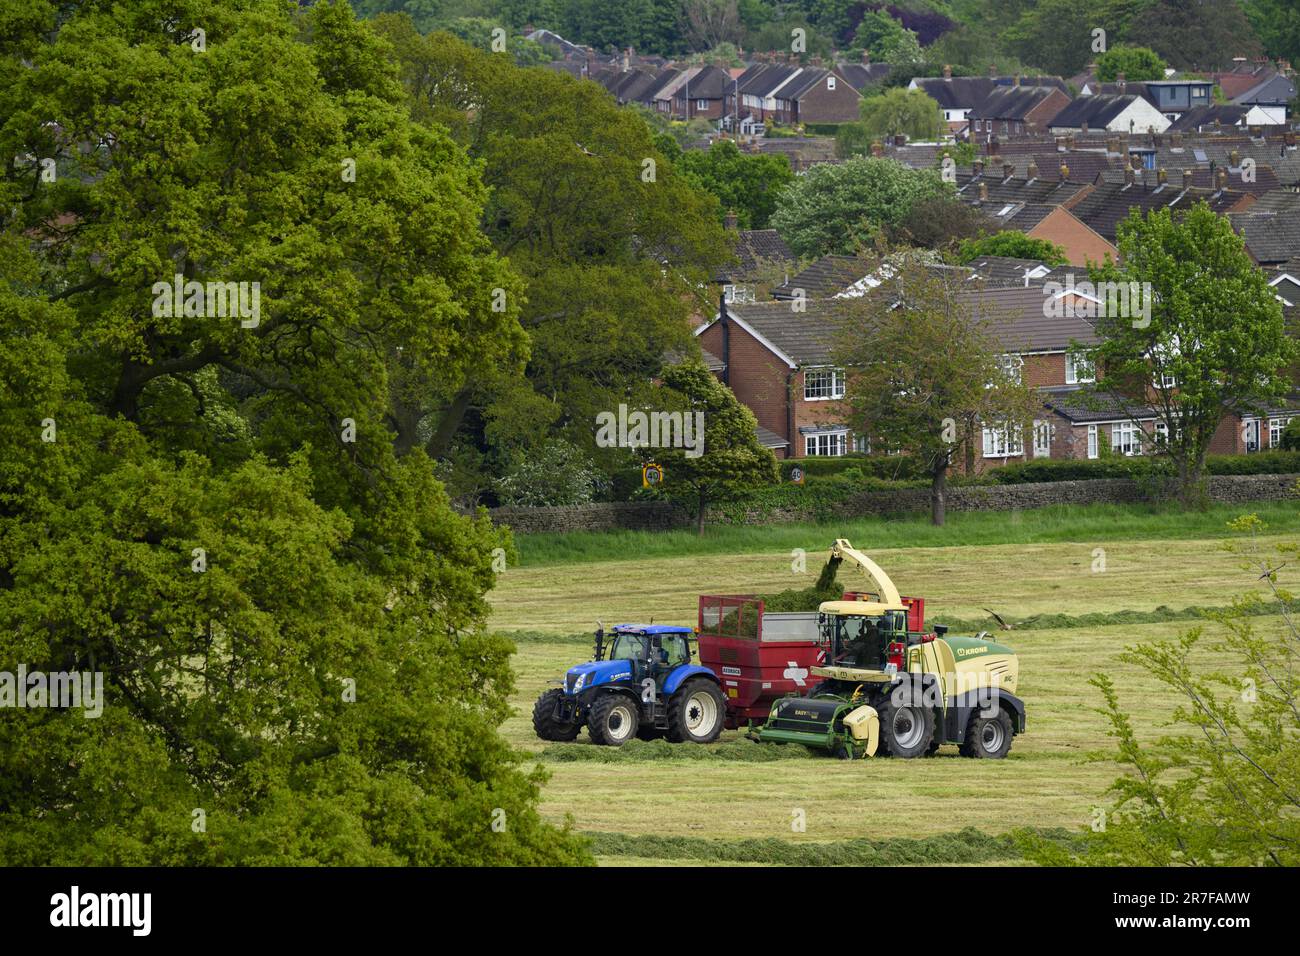 Krone BiG X 580 forager working, being driven on farmland pasture (loading filling trailer, cut field grass, farmers driving) - Yorkshire, England UK. Stock Photo